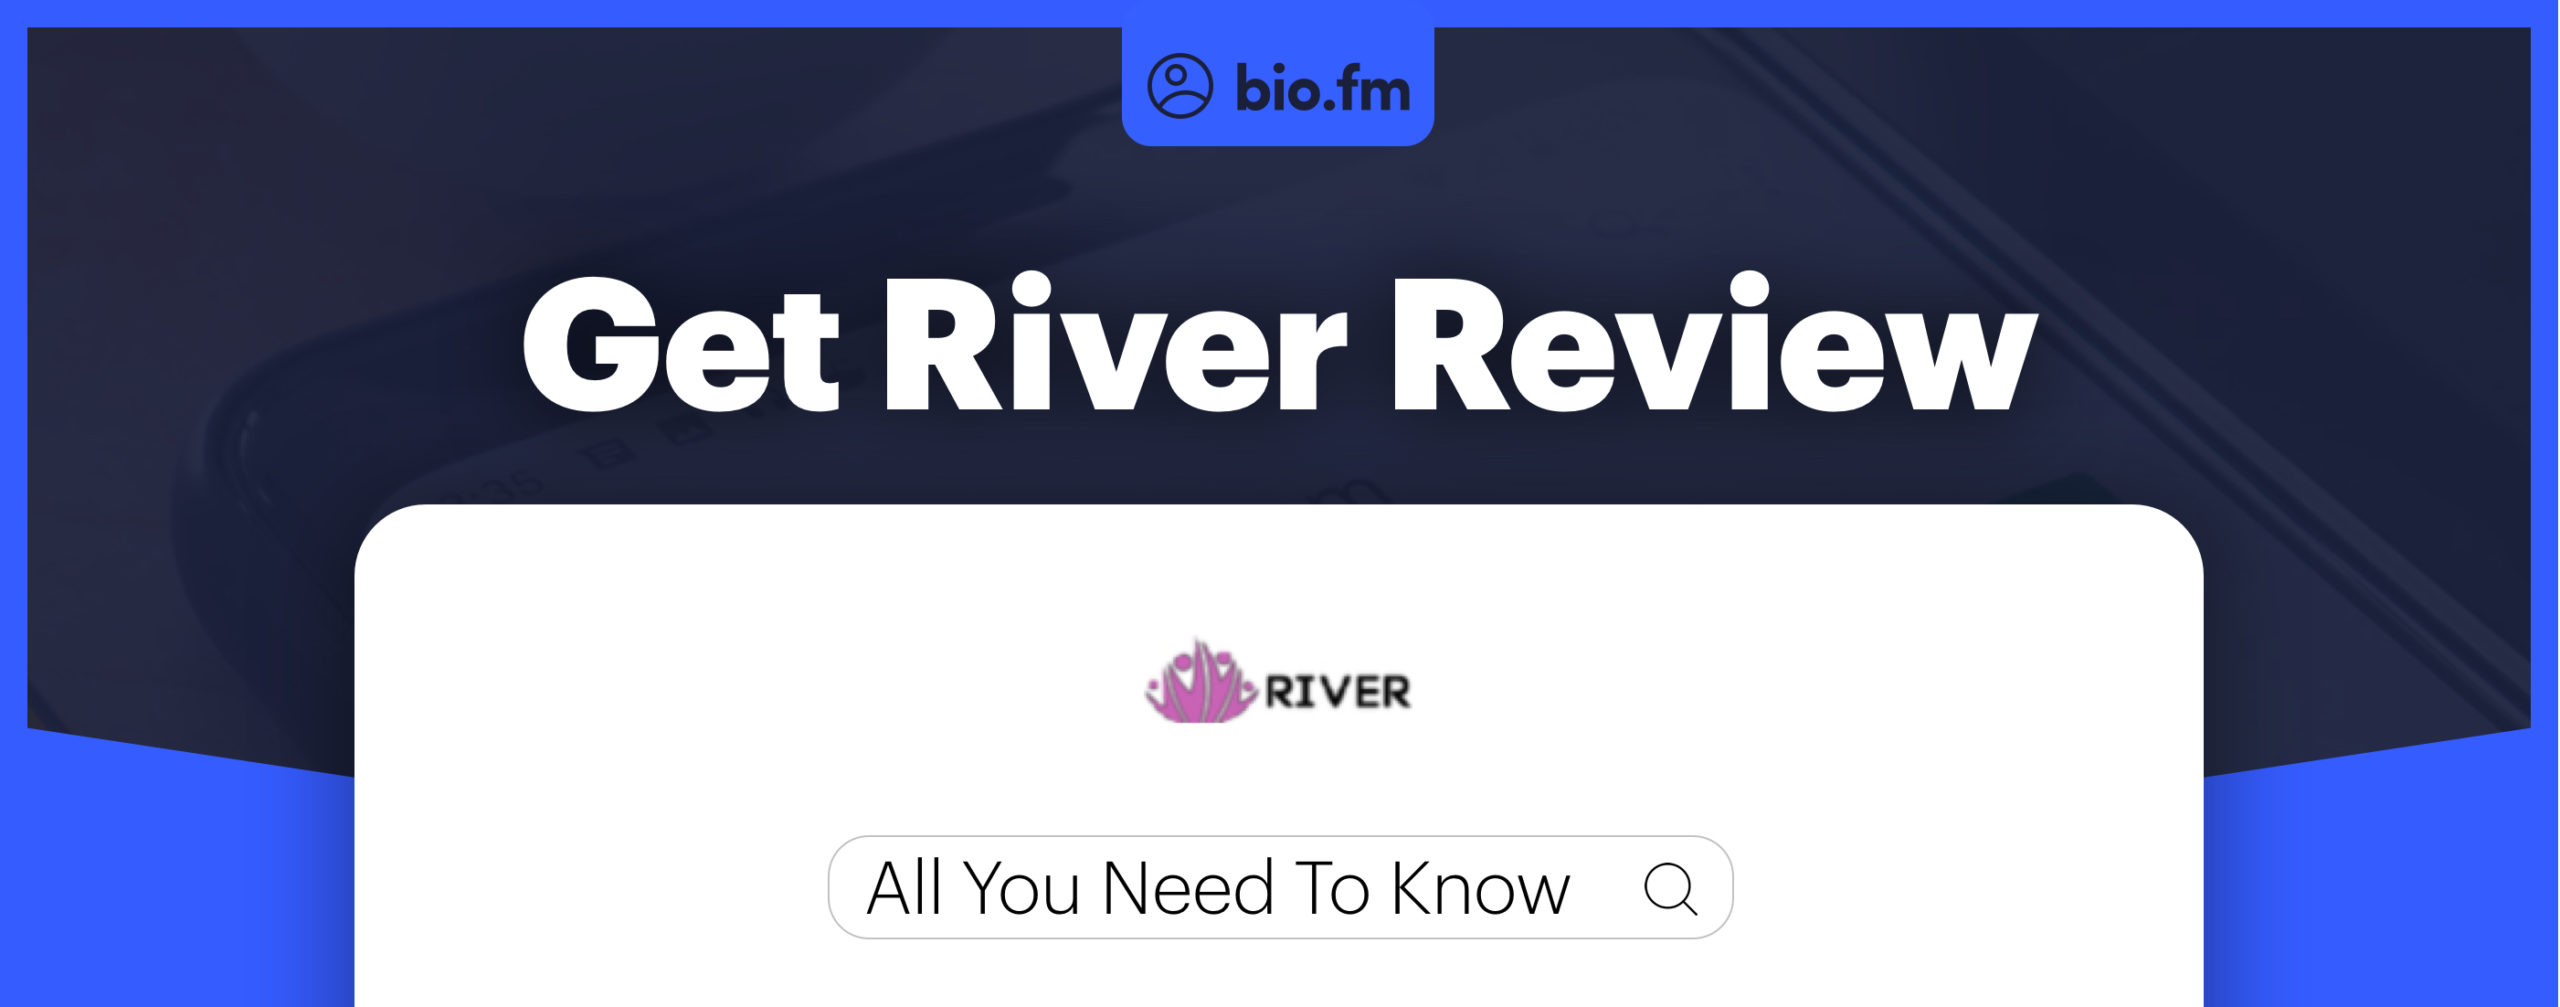 getriver review featured image